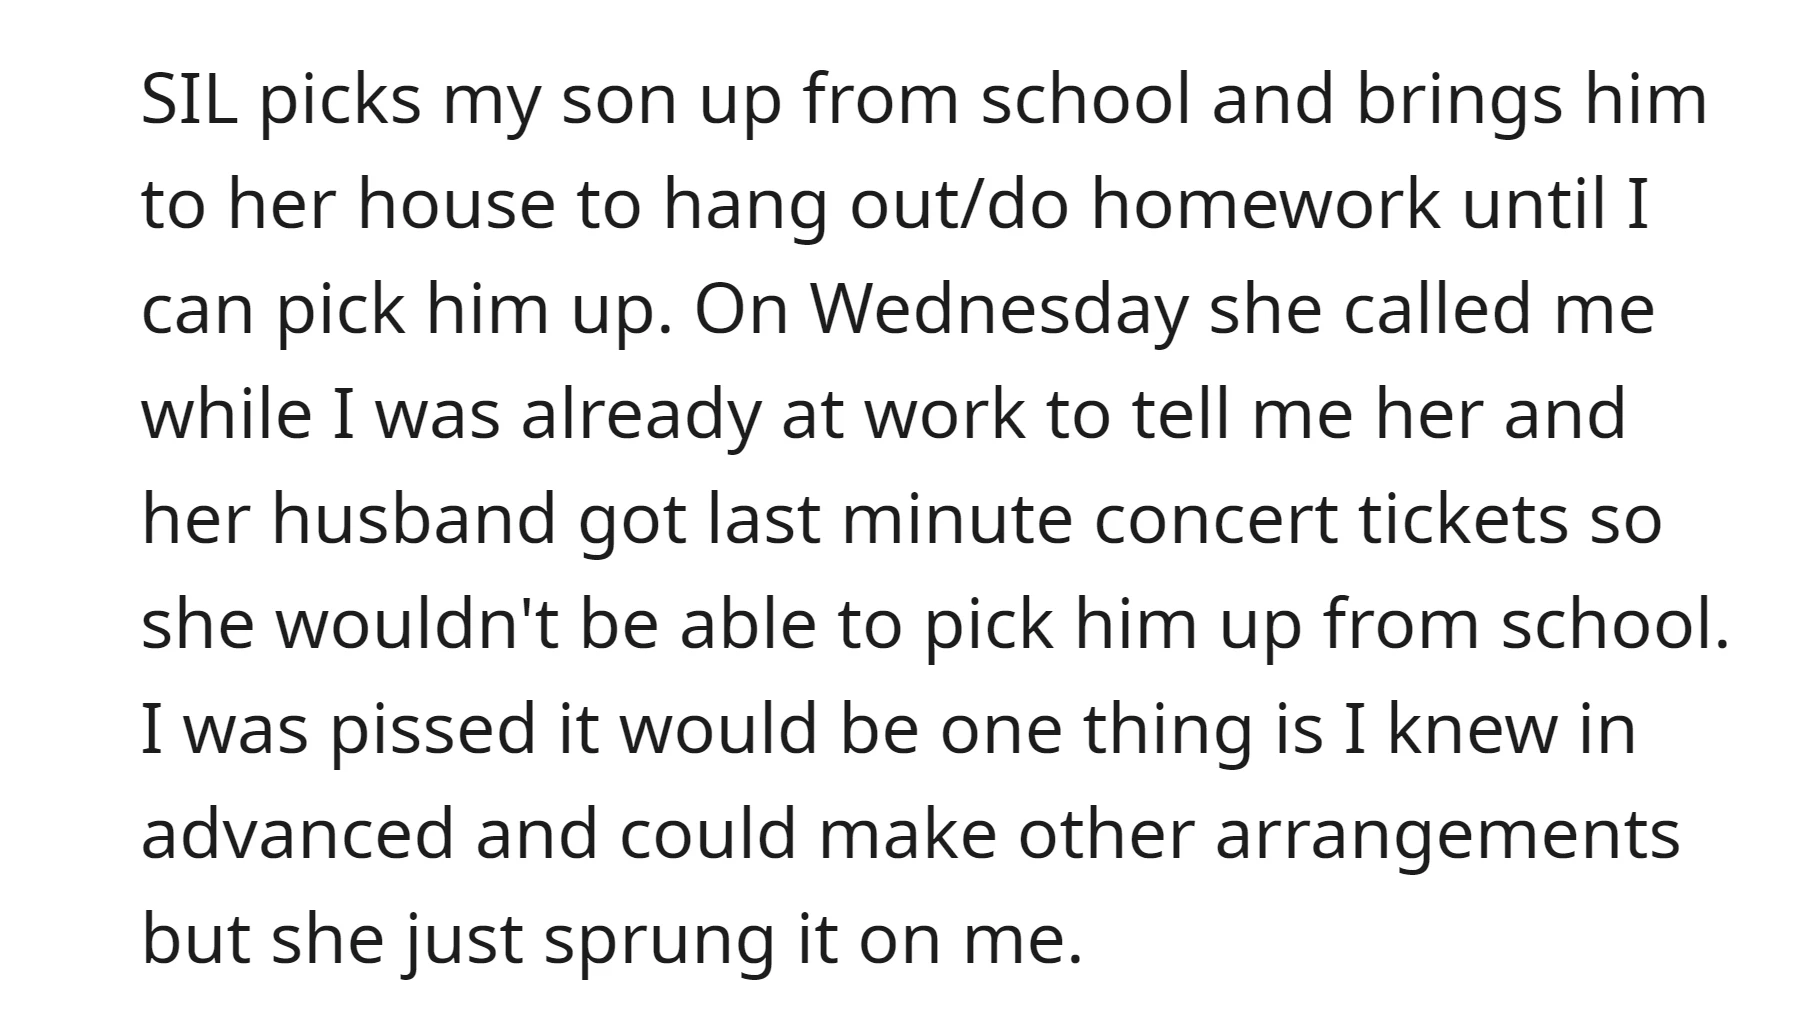 SIL suddenly couldn't pick up OP's son from school